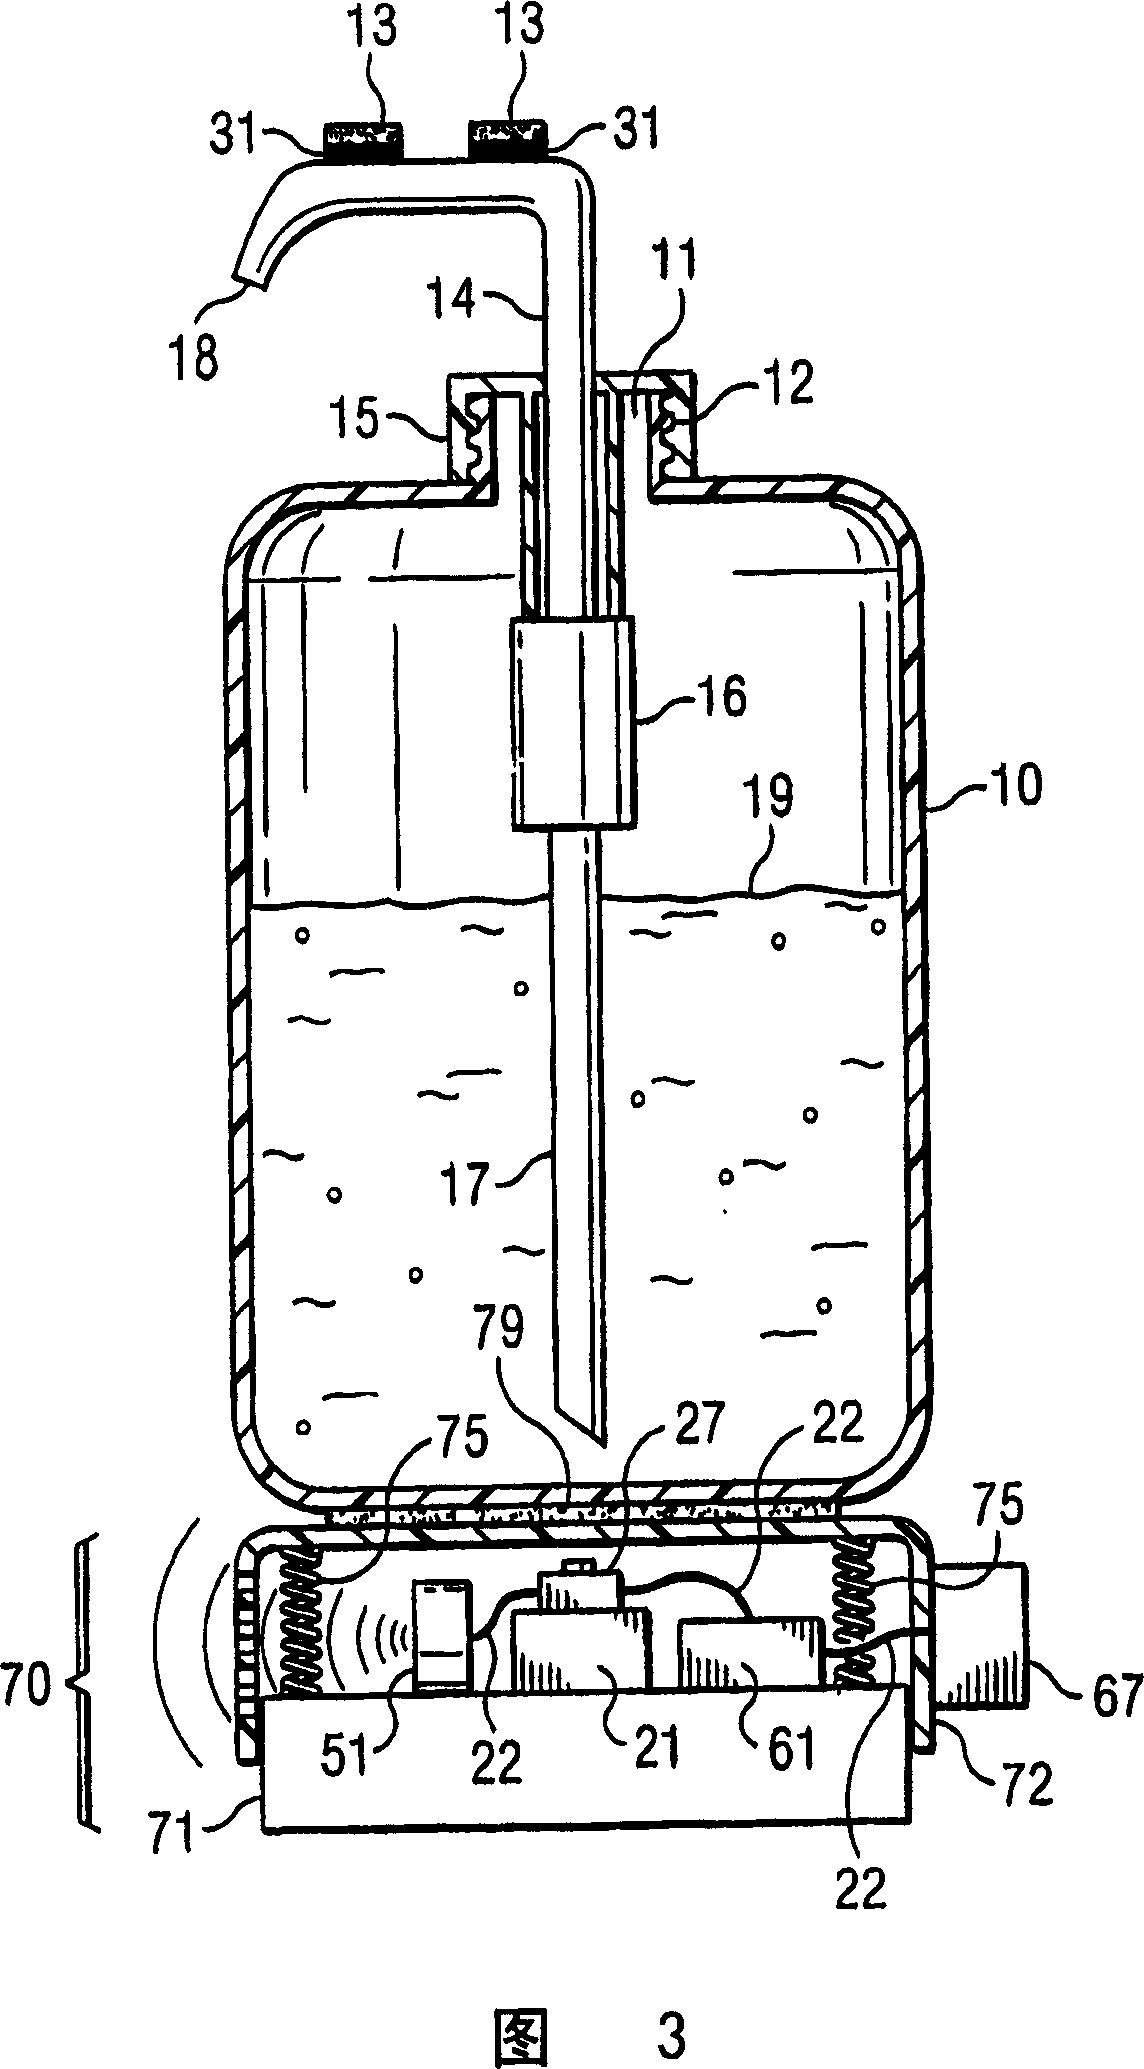 Soap dispenser and use method for assuring clean hands